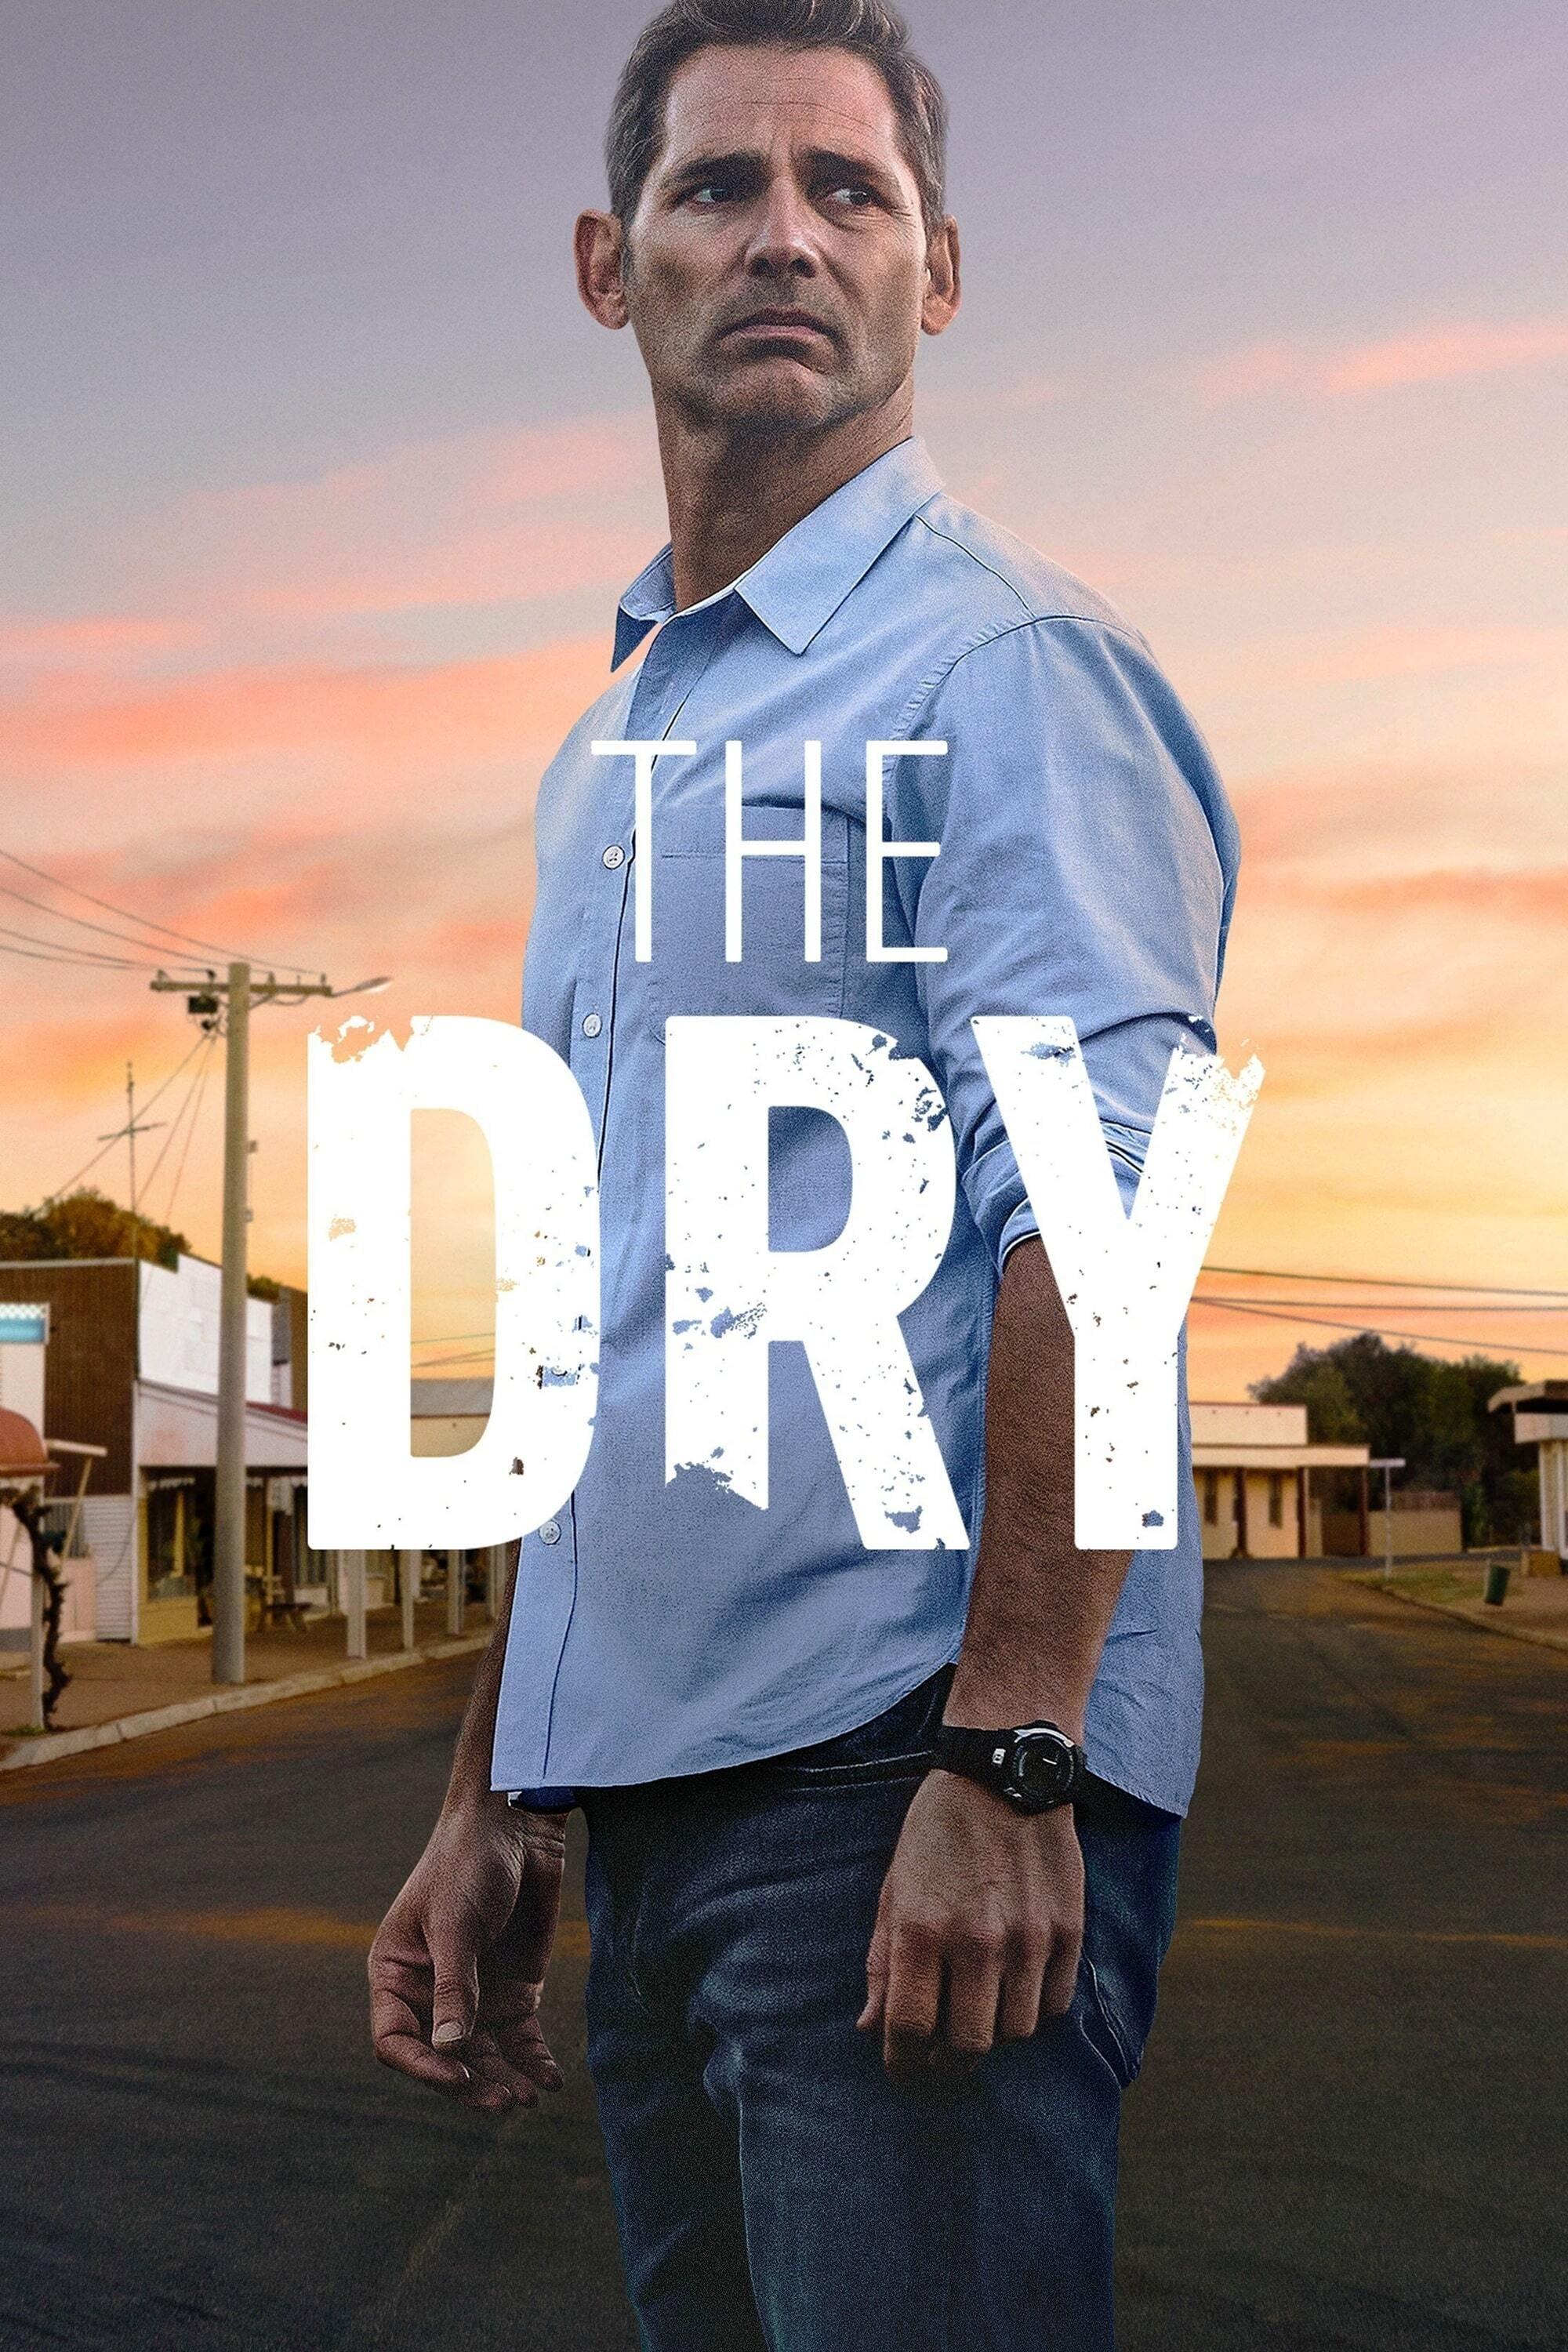 The Dry poster